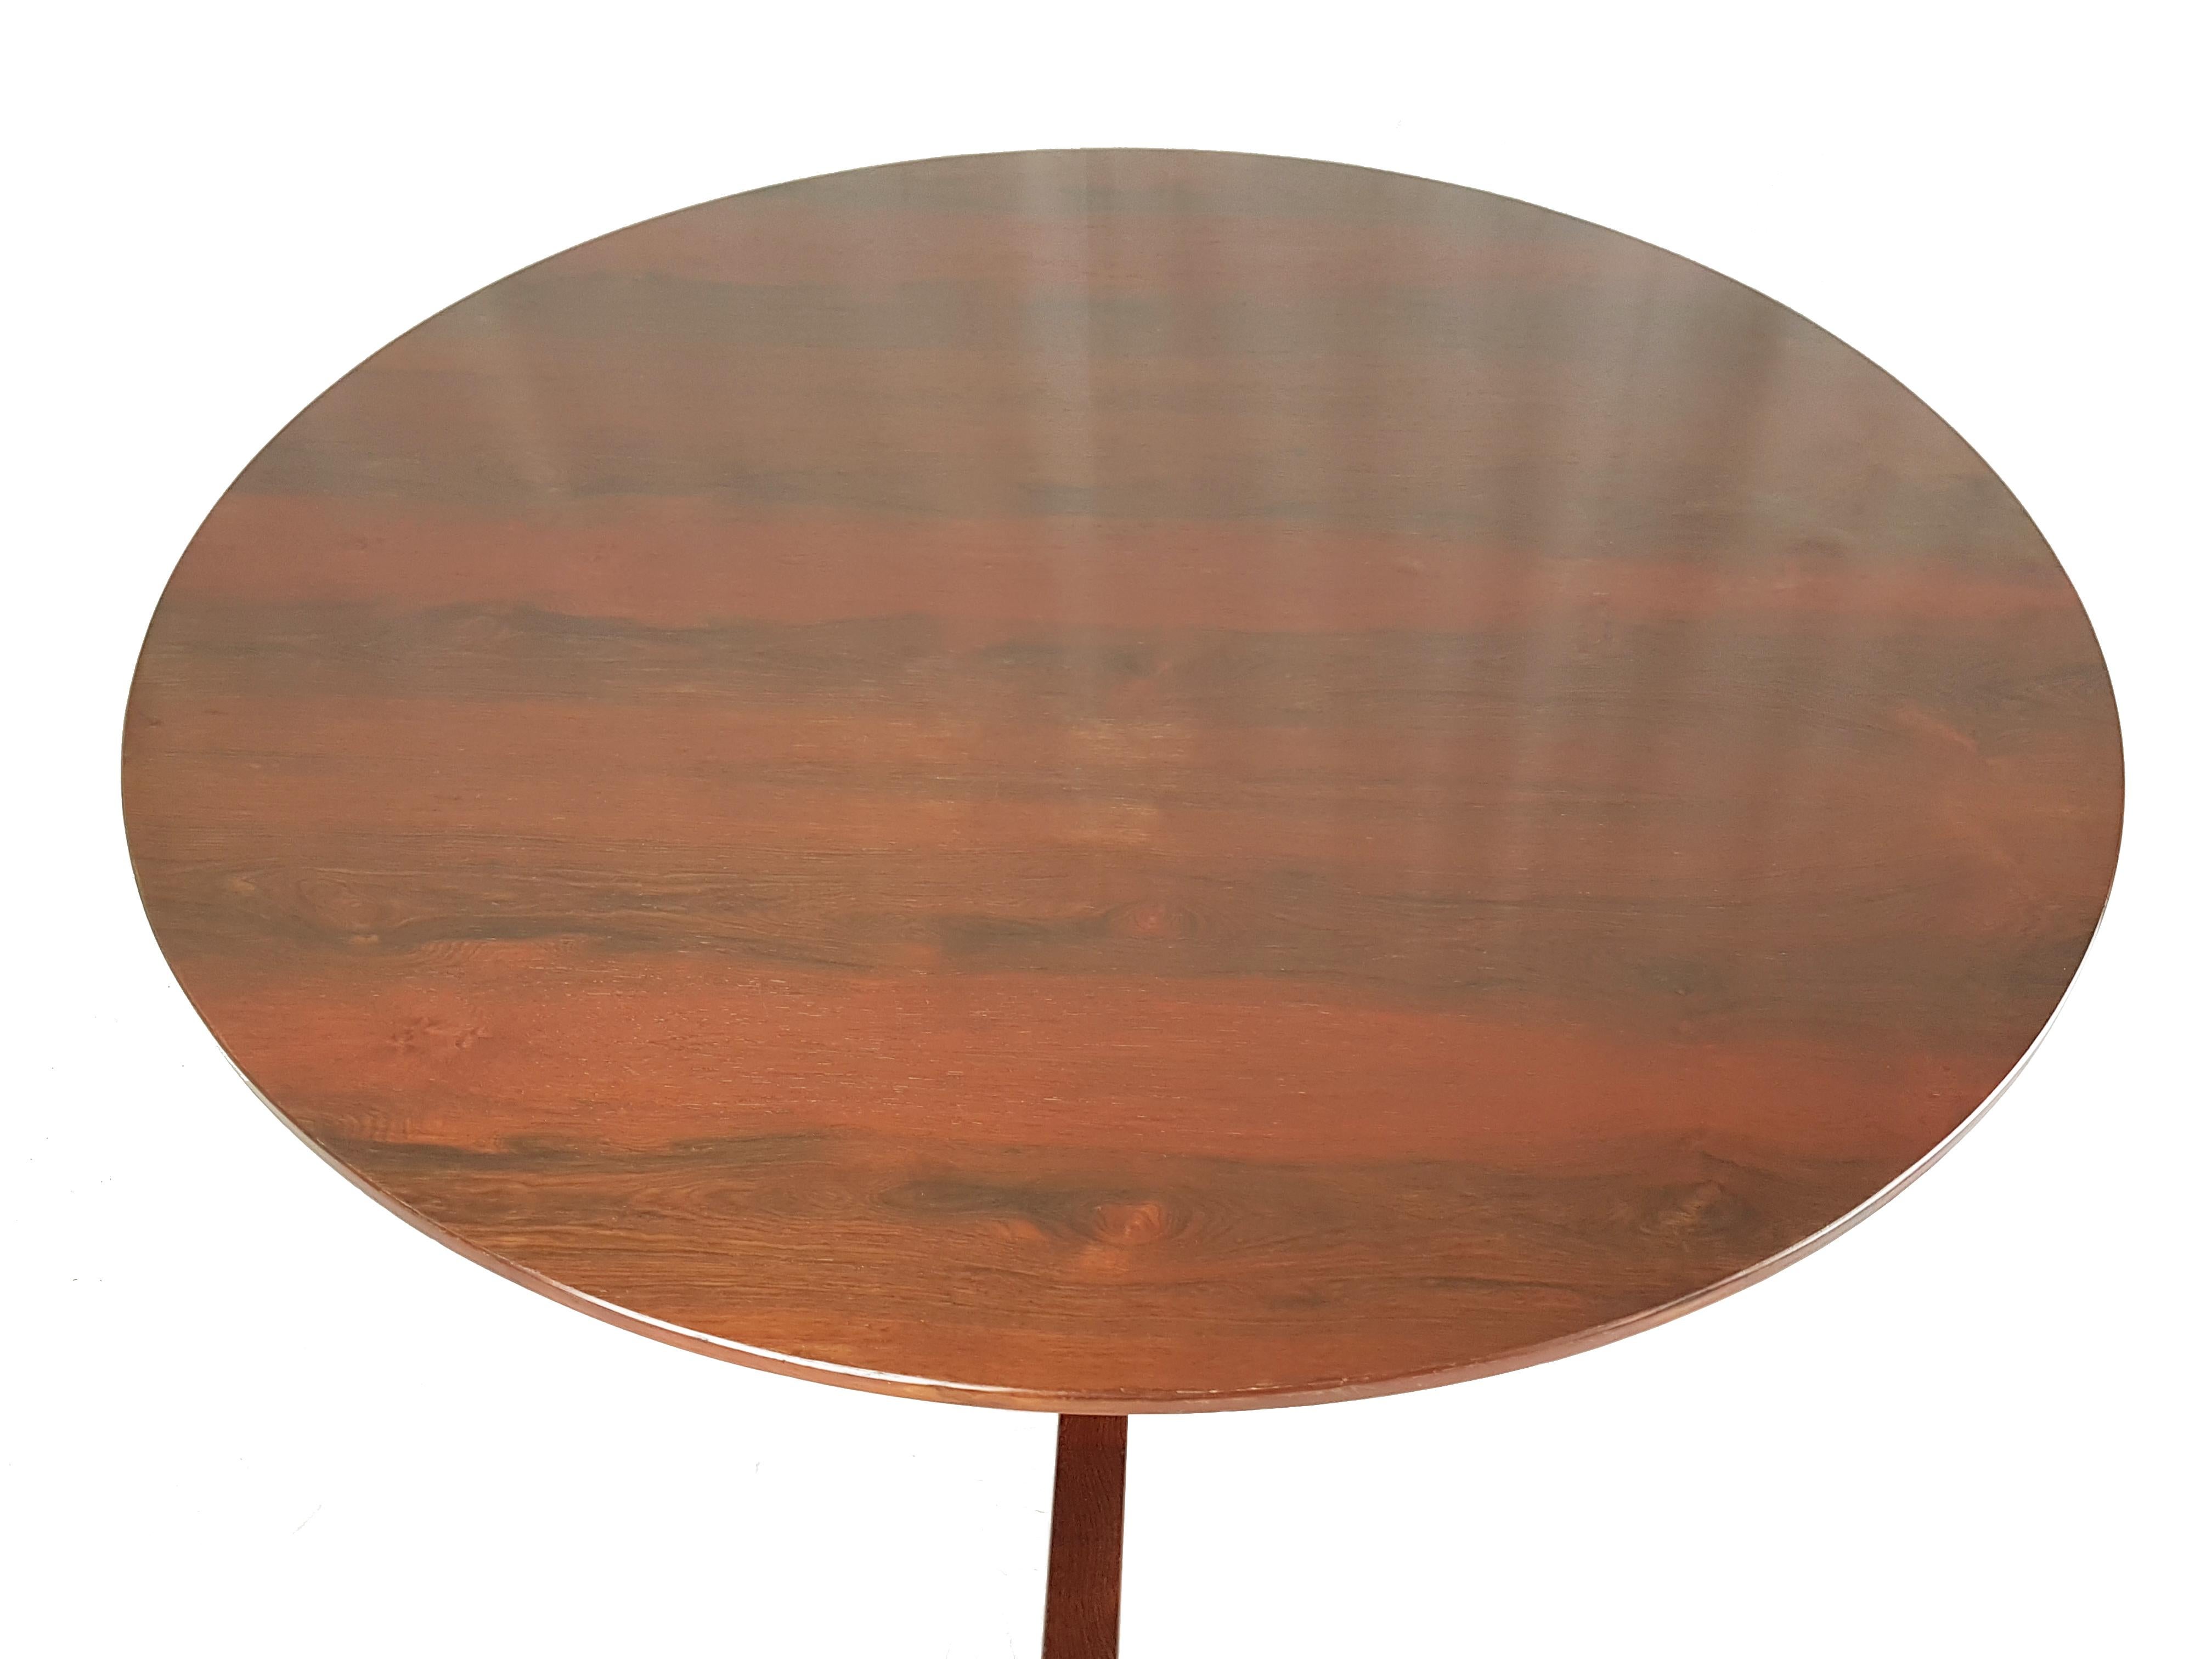 Italian Wooden Round, 1960s Dining Table by Gianfranco Frattini for Bernini 2